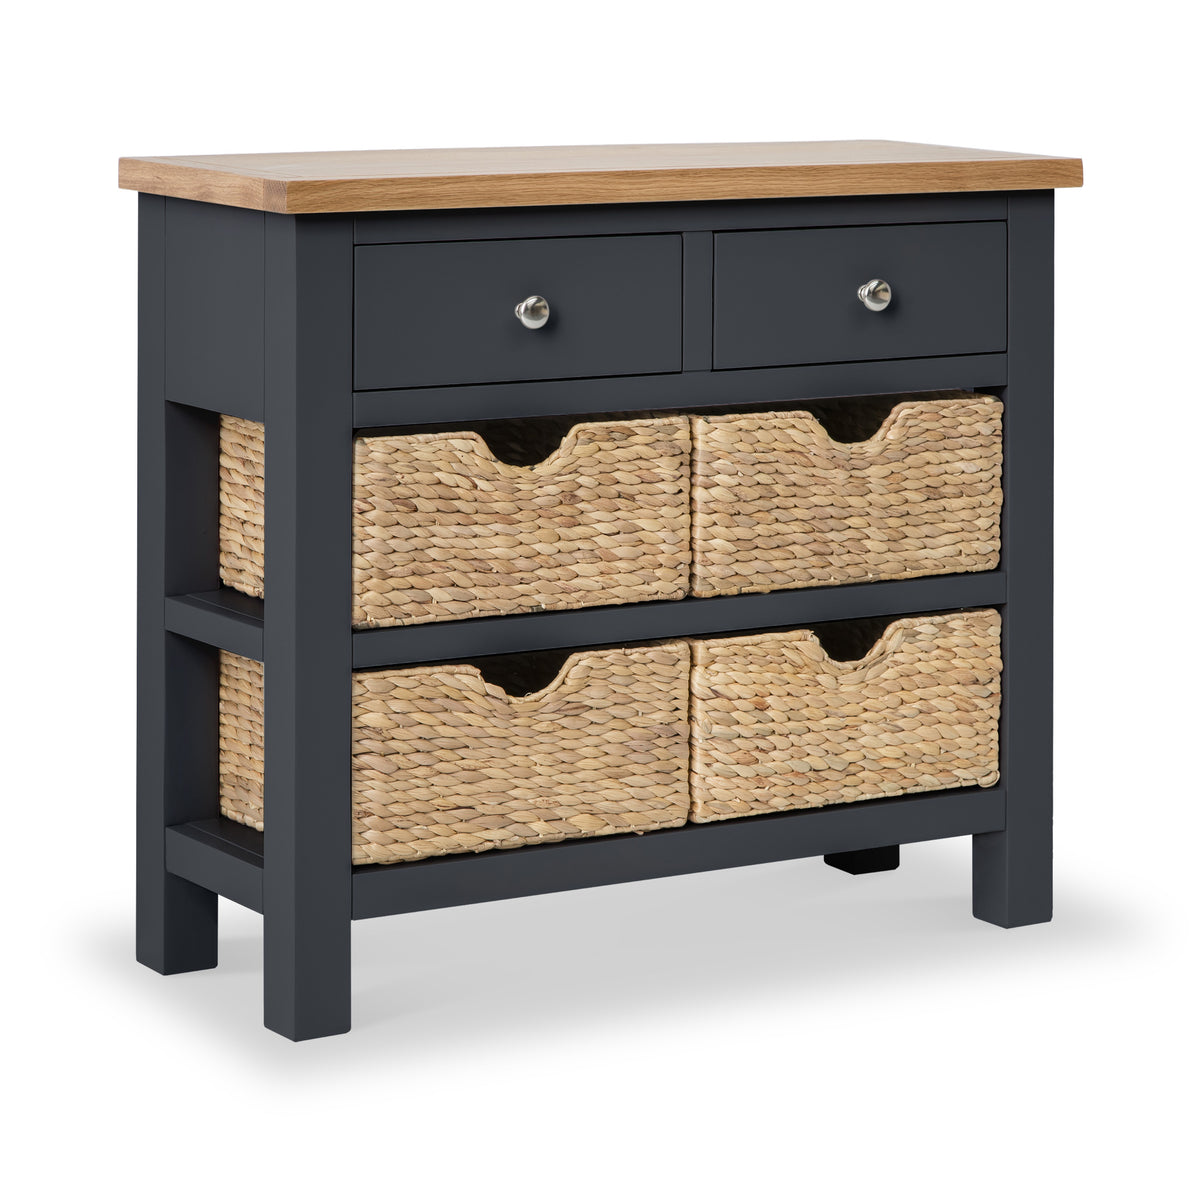 Farrow Charcoal Console Table with Baskets from Roseland Furniture